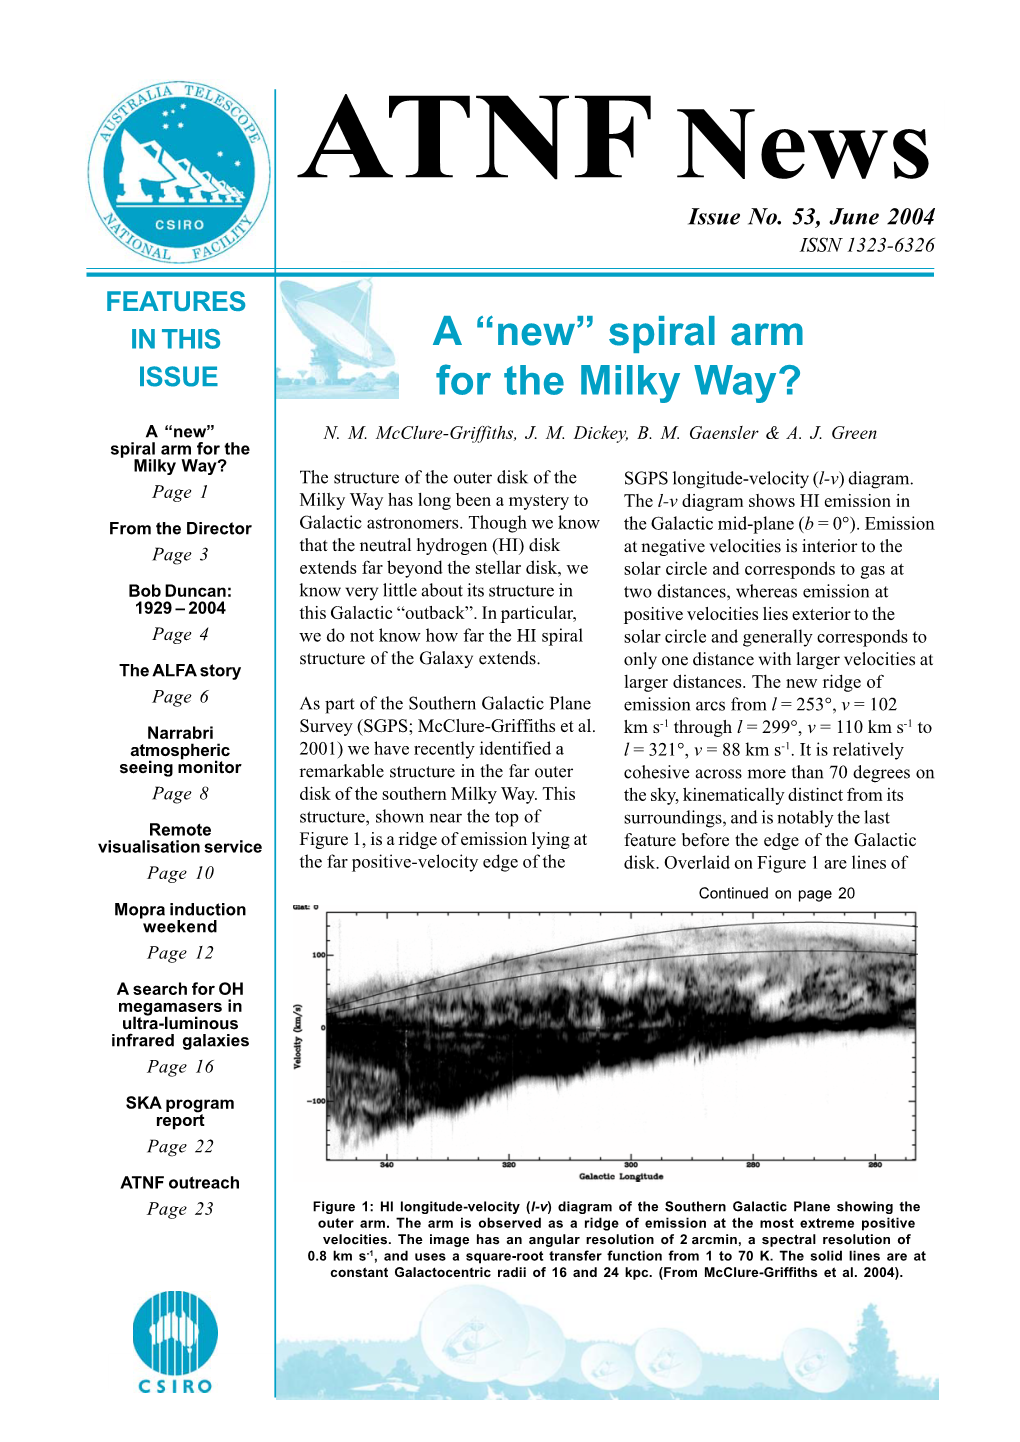 A “New” Spiral Arm for the Milky Way?